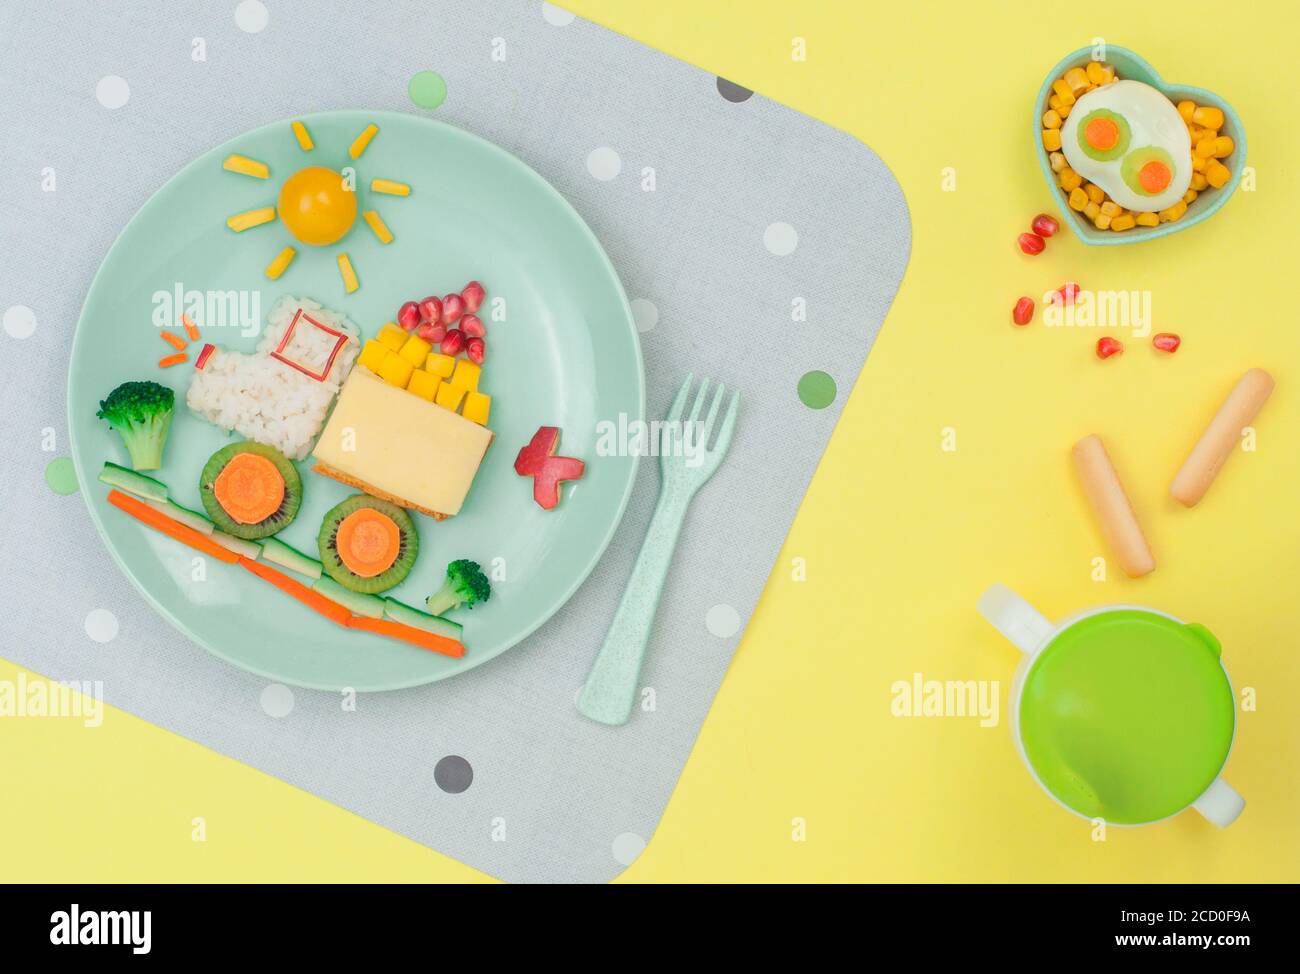 Kids food art concept: car from rice, sandwich and fresh fruits and vegetables on the yellow background; top view, flat lay Stock Photo